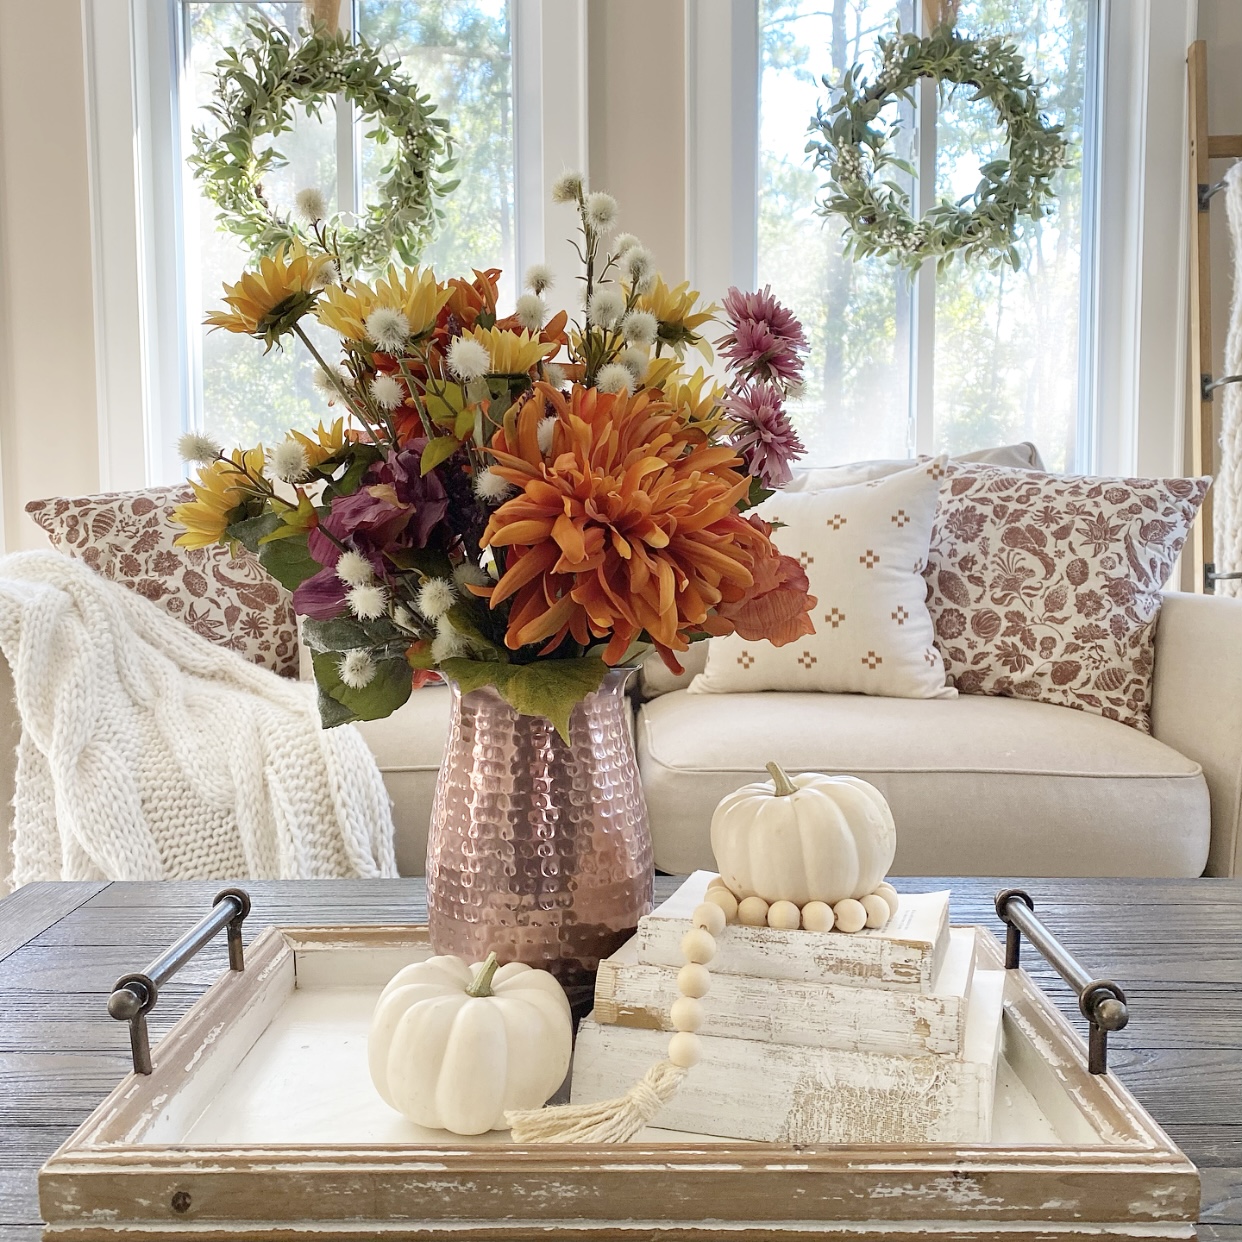 Copper pitcher filled with Fall florals, vintage stacked books, white mini pumpkins, and wood beads on a tray on a coffee table. In the background is a sofa with Fall pillows on it and a cozy knit blanket. There are wreaths hanging from the windows.